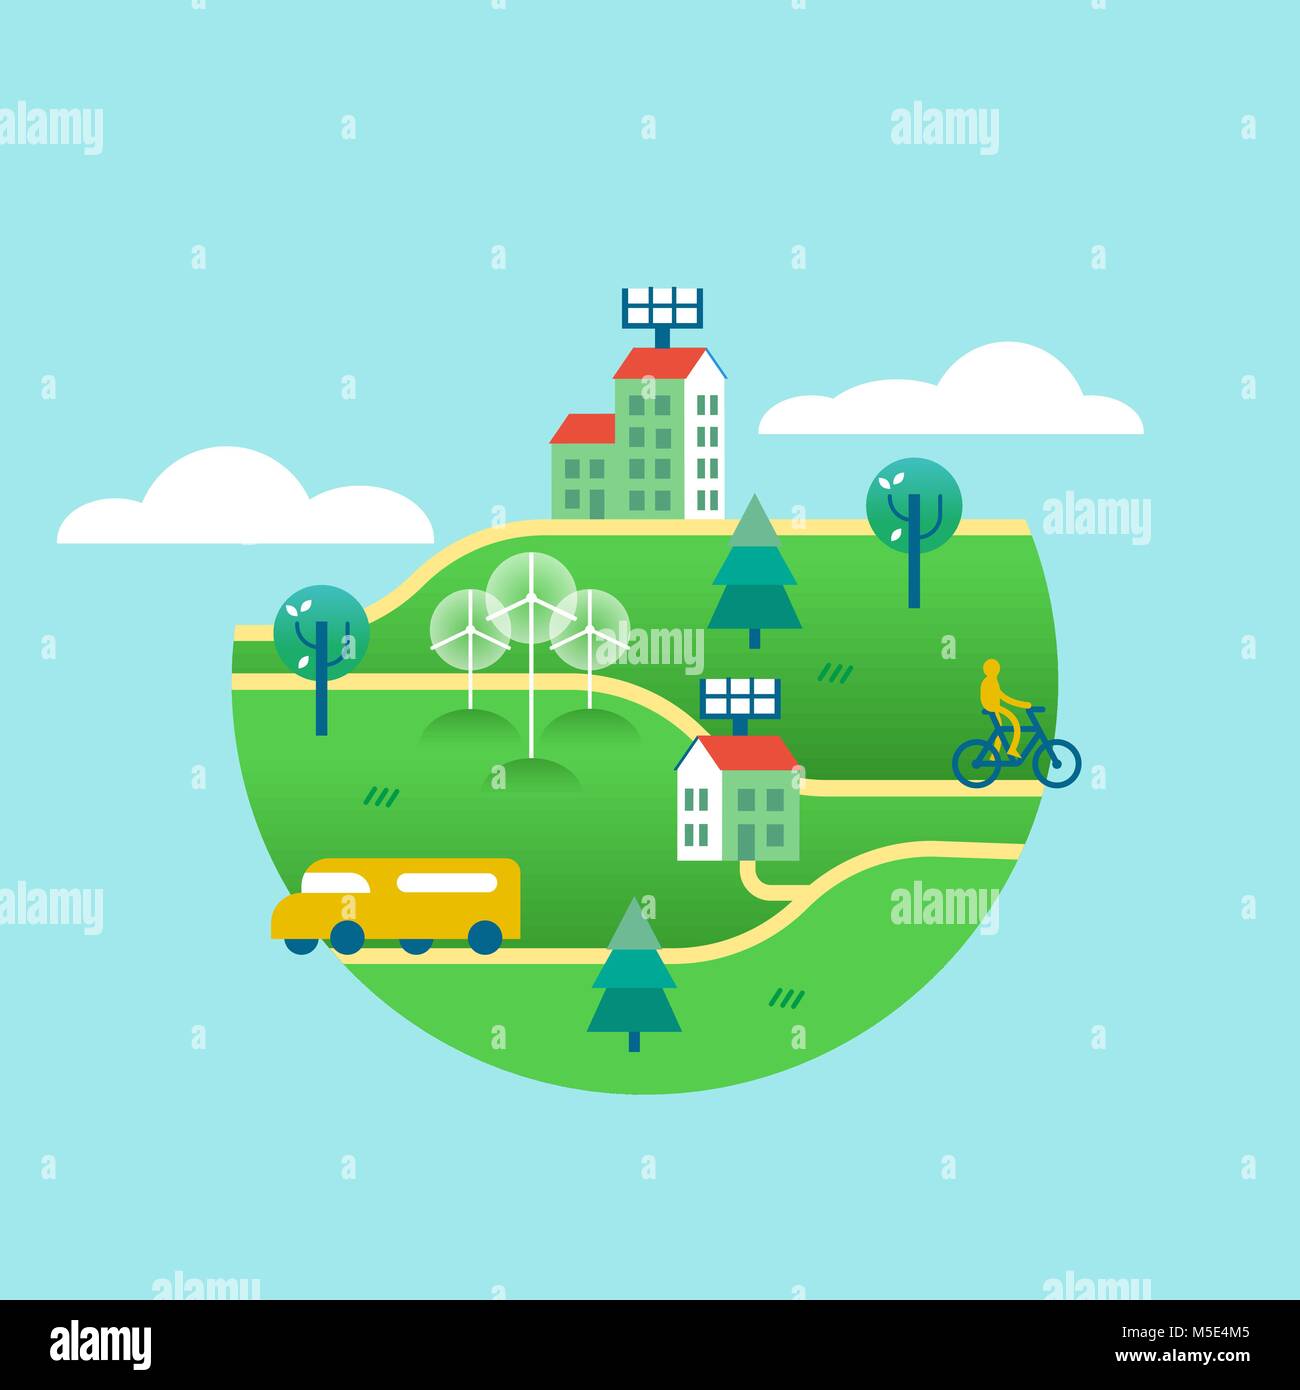 Green world concept illustration, eco friendly city with solar panels in houses, wind turbines, public transport and bikes. Flat art style design for  Stock Vector